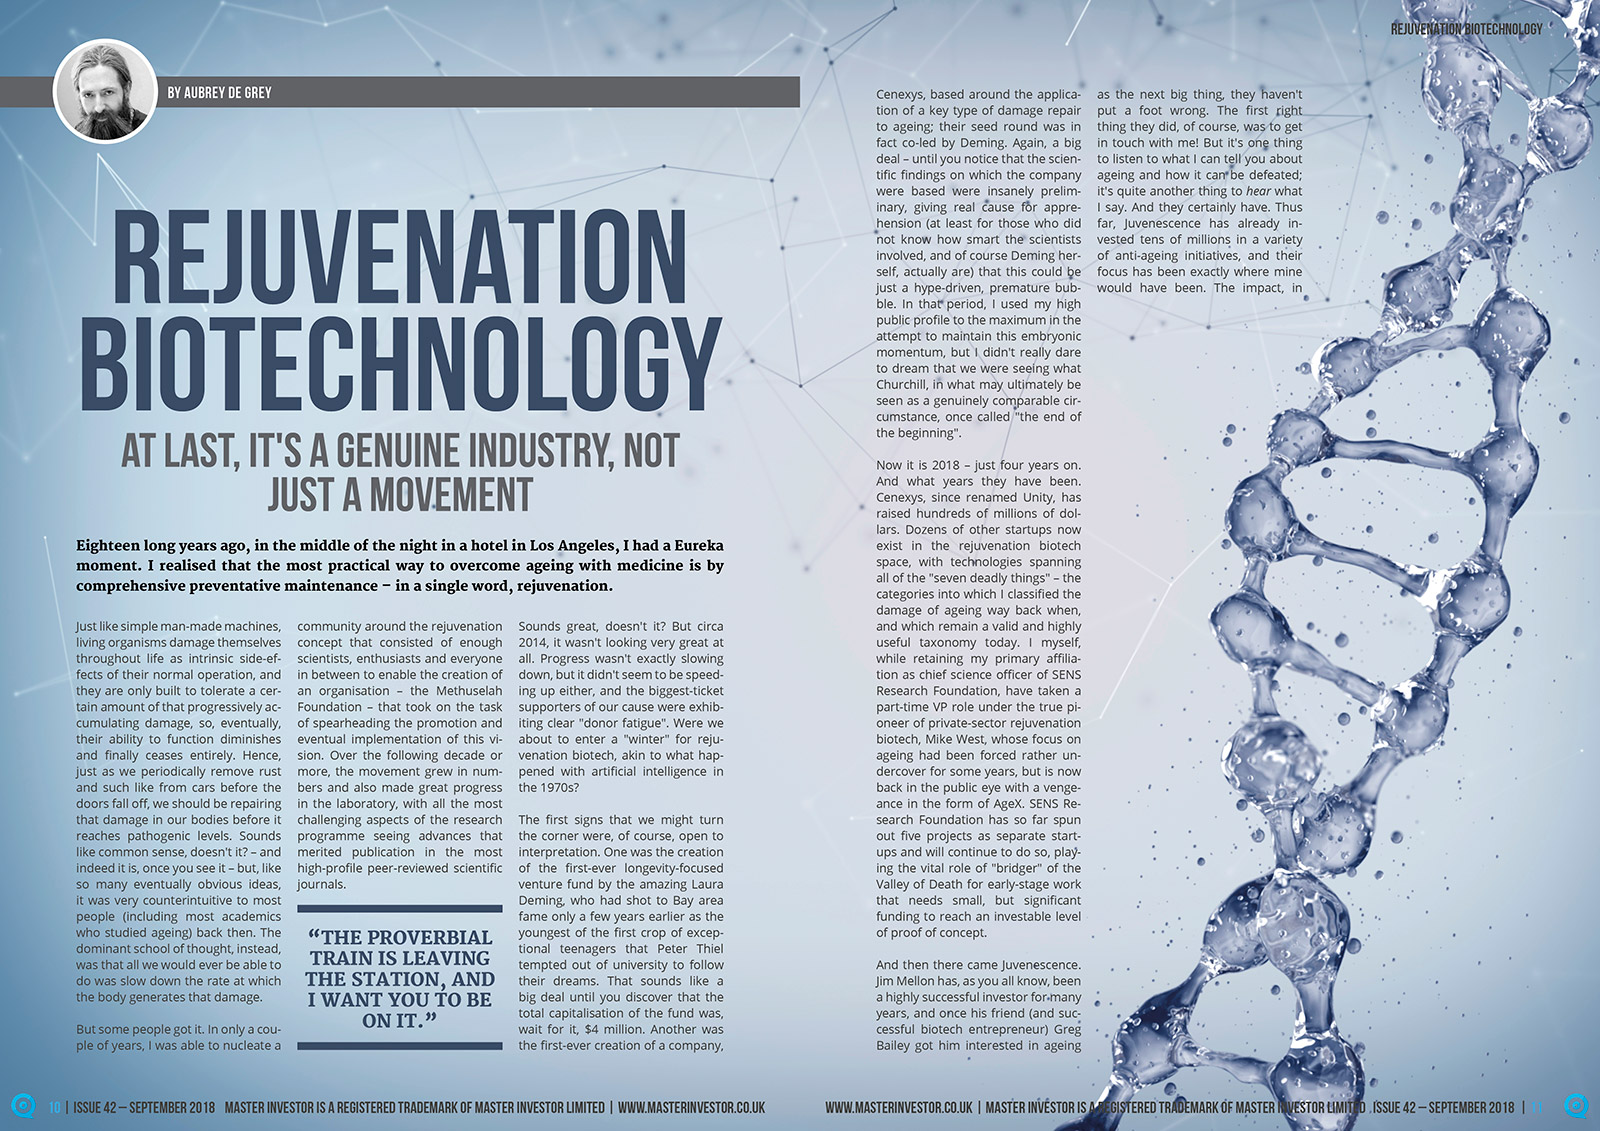 Rejuvenation biotechnology: At last, it's a genuine industry, not just a movement